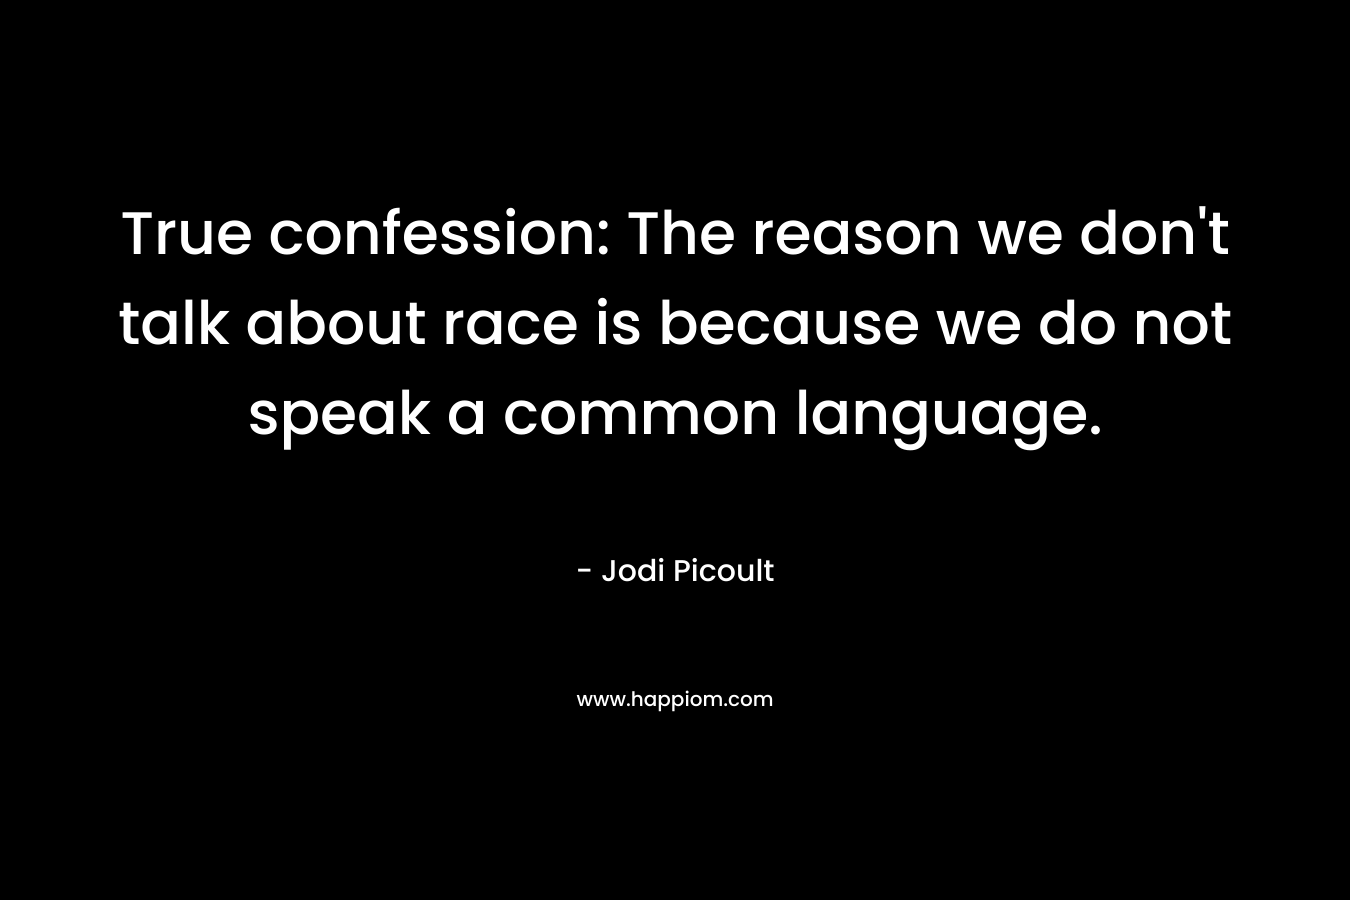 True confession: The reason we don't talk about race is because we do not speak a common language.